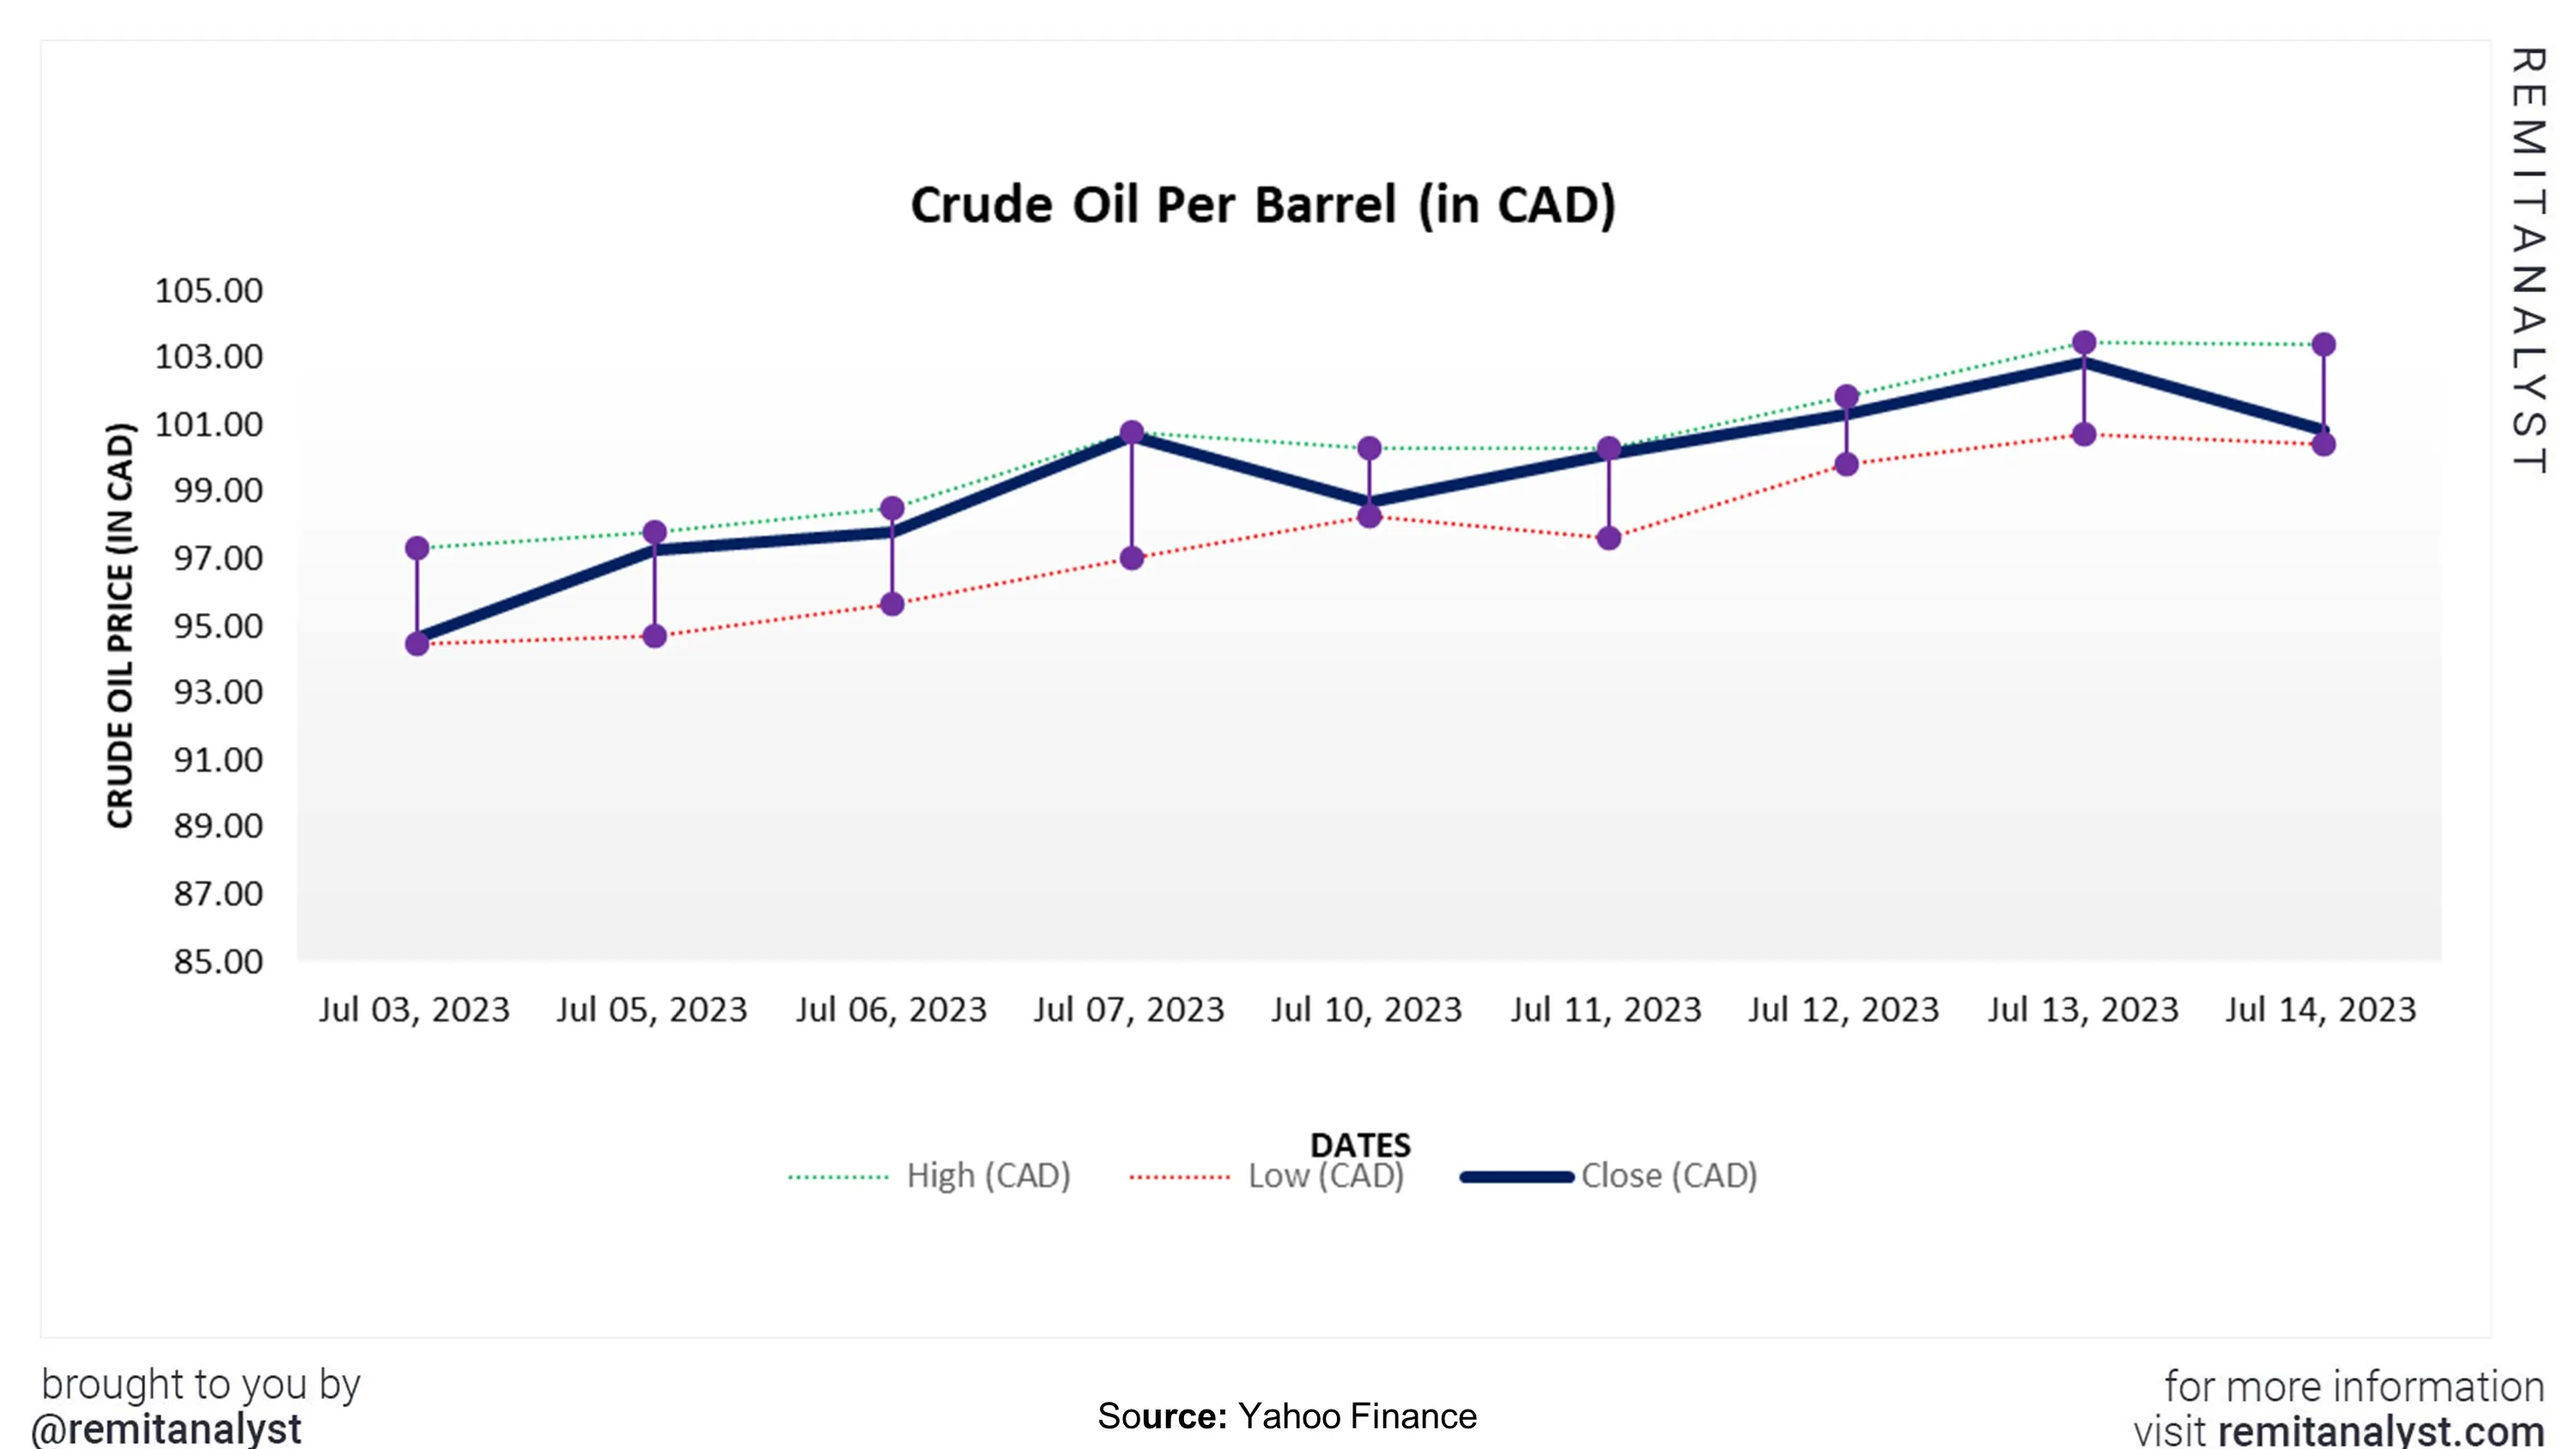 crude-oil-prices-canada-from-3-july-2023-to-14-july-2023